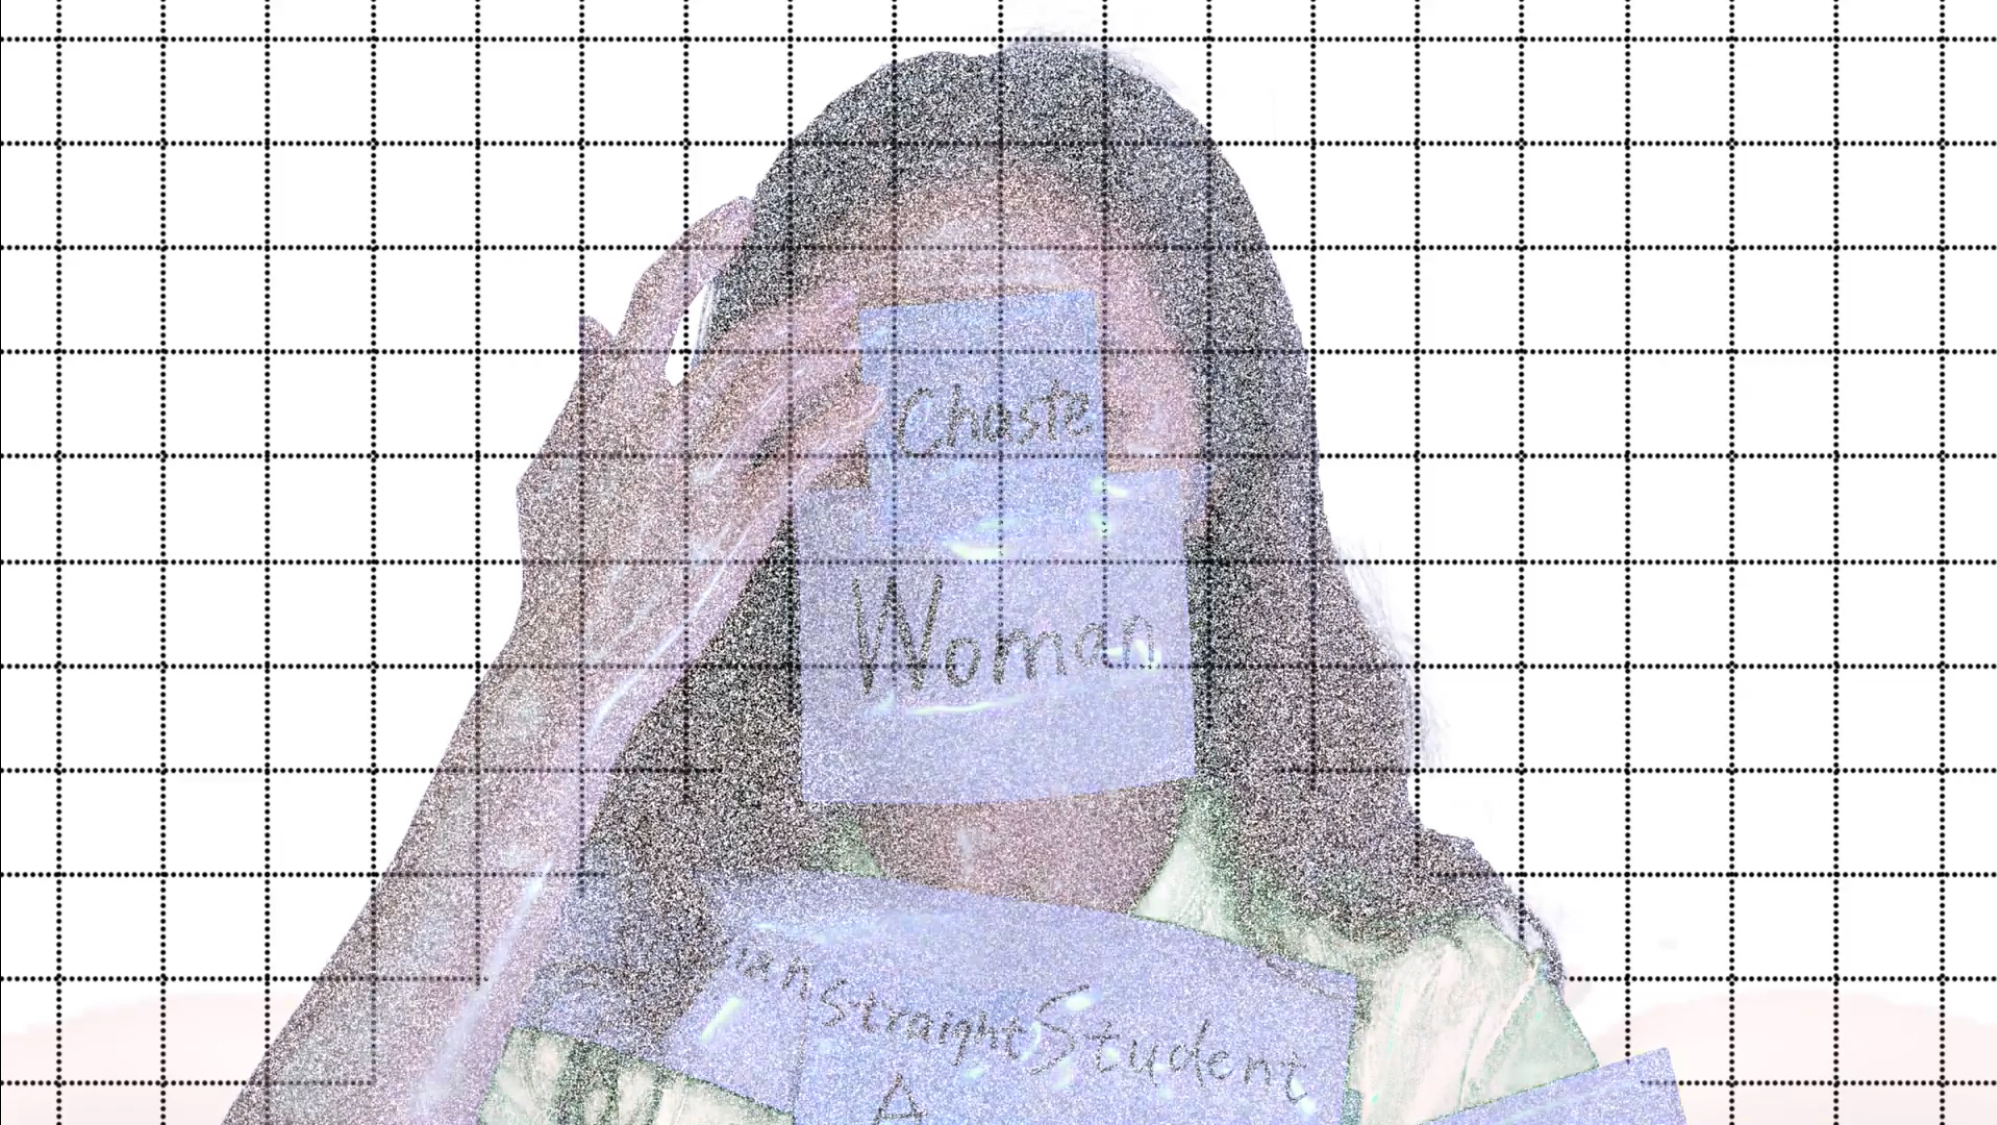 Image of a person against a white background, with labels adhered to their skin like "Chaste Woman" and "Straight A Student," with a superimposed black grid outline.